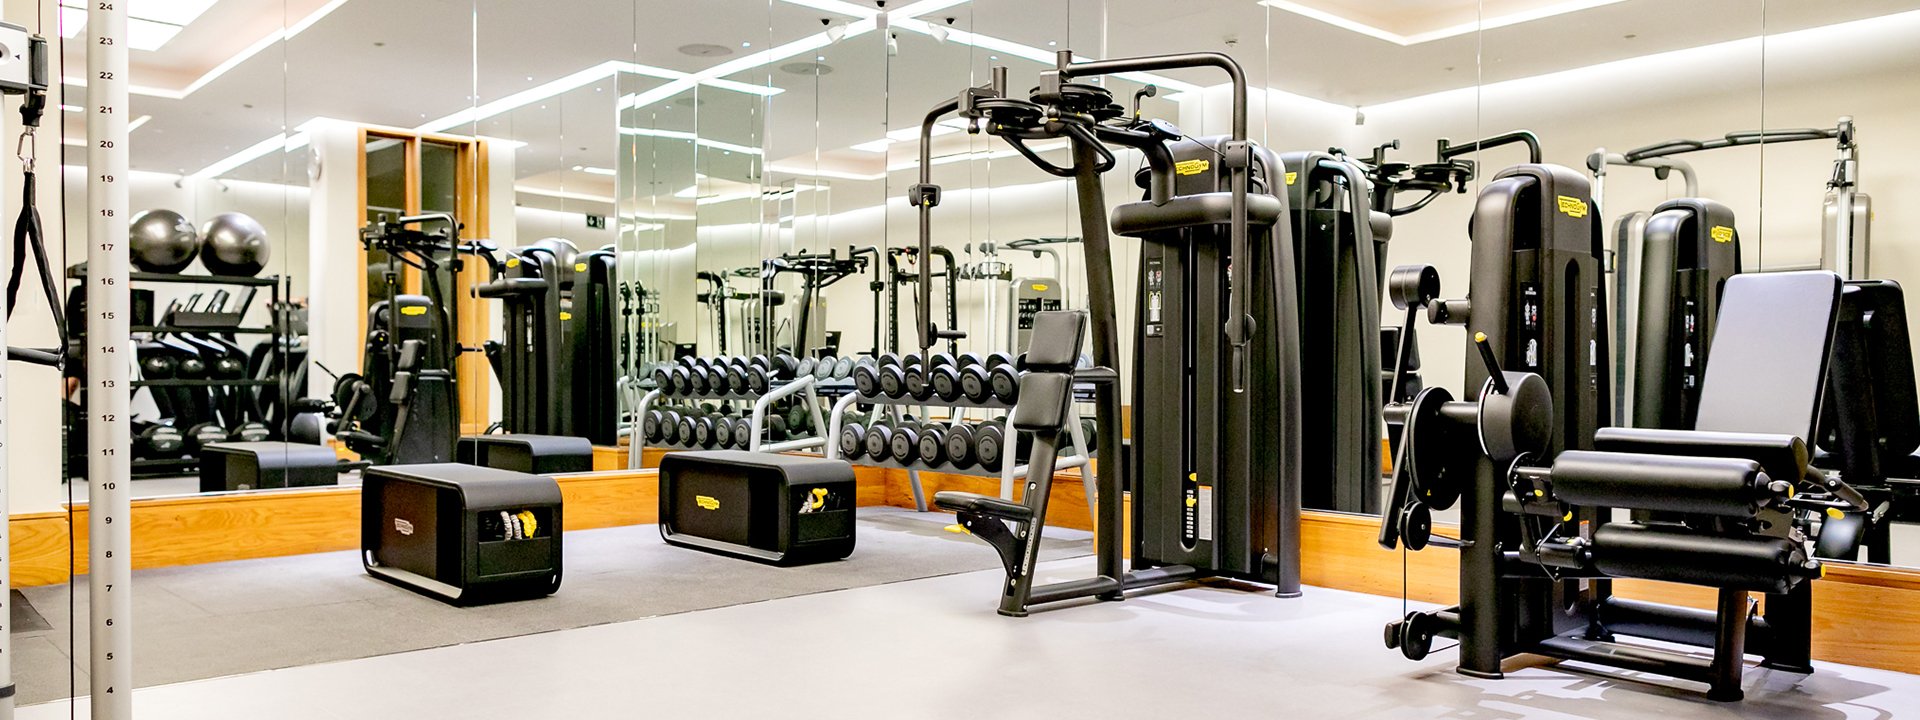 A view of the gym and equipment at the Aman Spa fitness center and gym, a place where guests can work out at The Connaught.